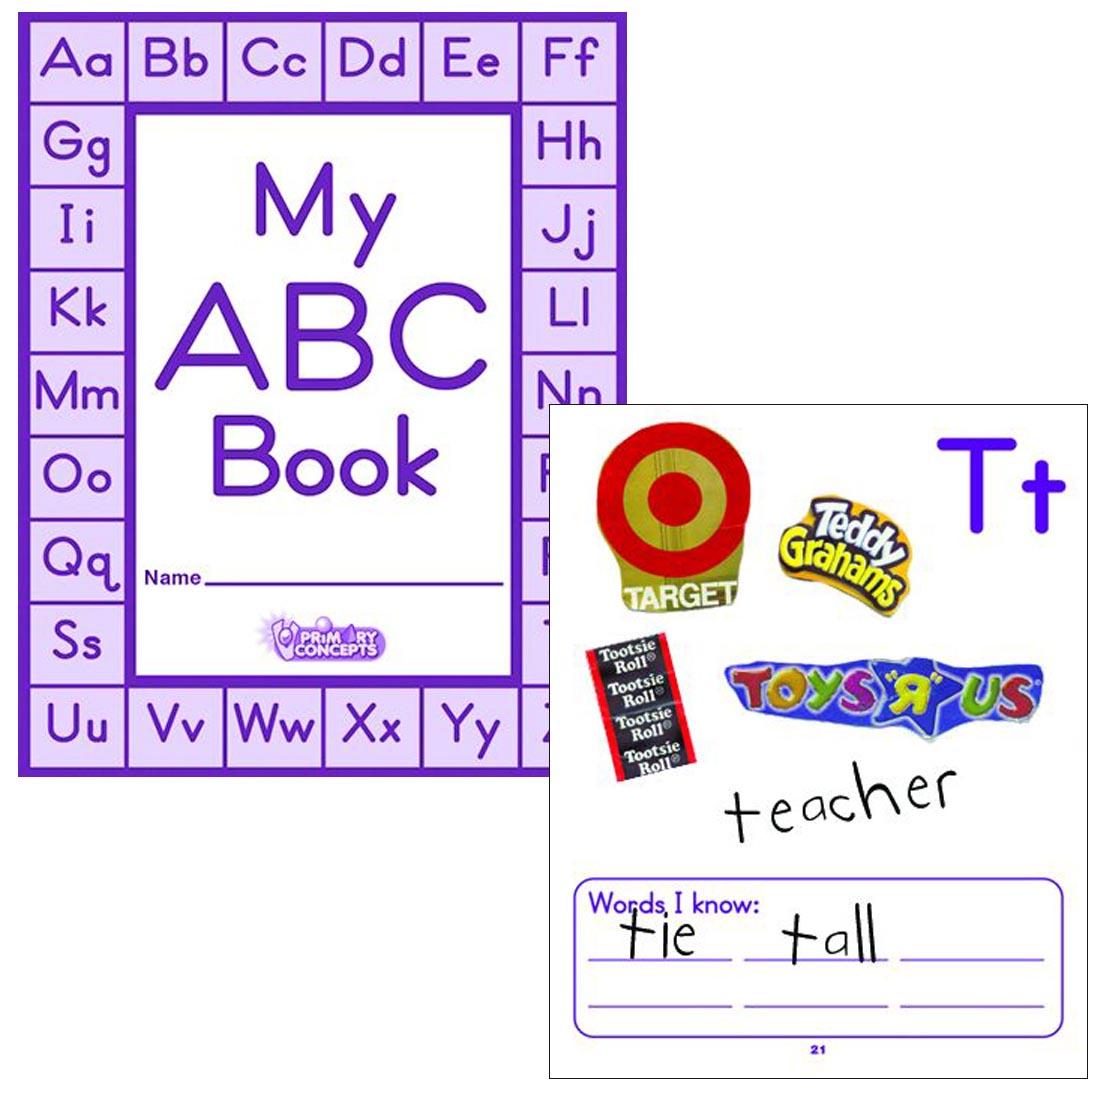 My ABC Book by Primary Concepts with a completed example of the 'T' page